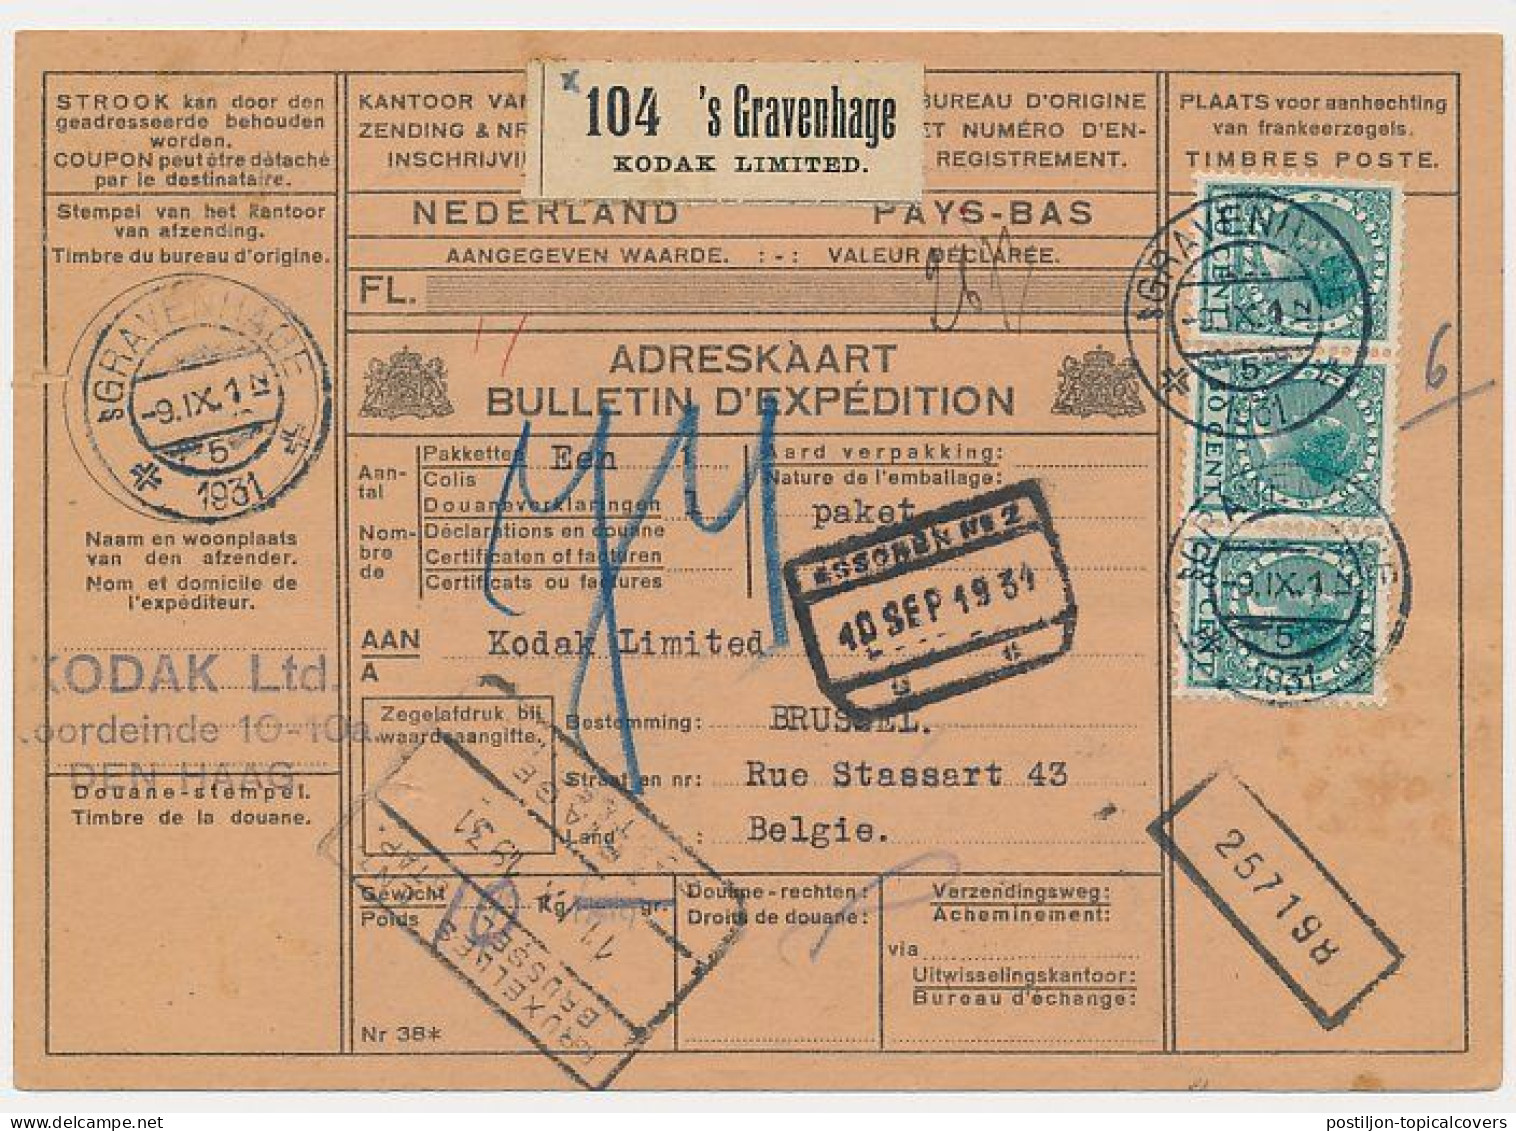 KODAK LIMITED - Rare Private Postal Label - Address / Package Card The Netherlands 1931 - Photography - Photography